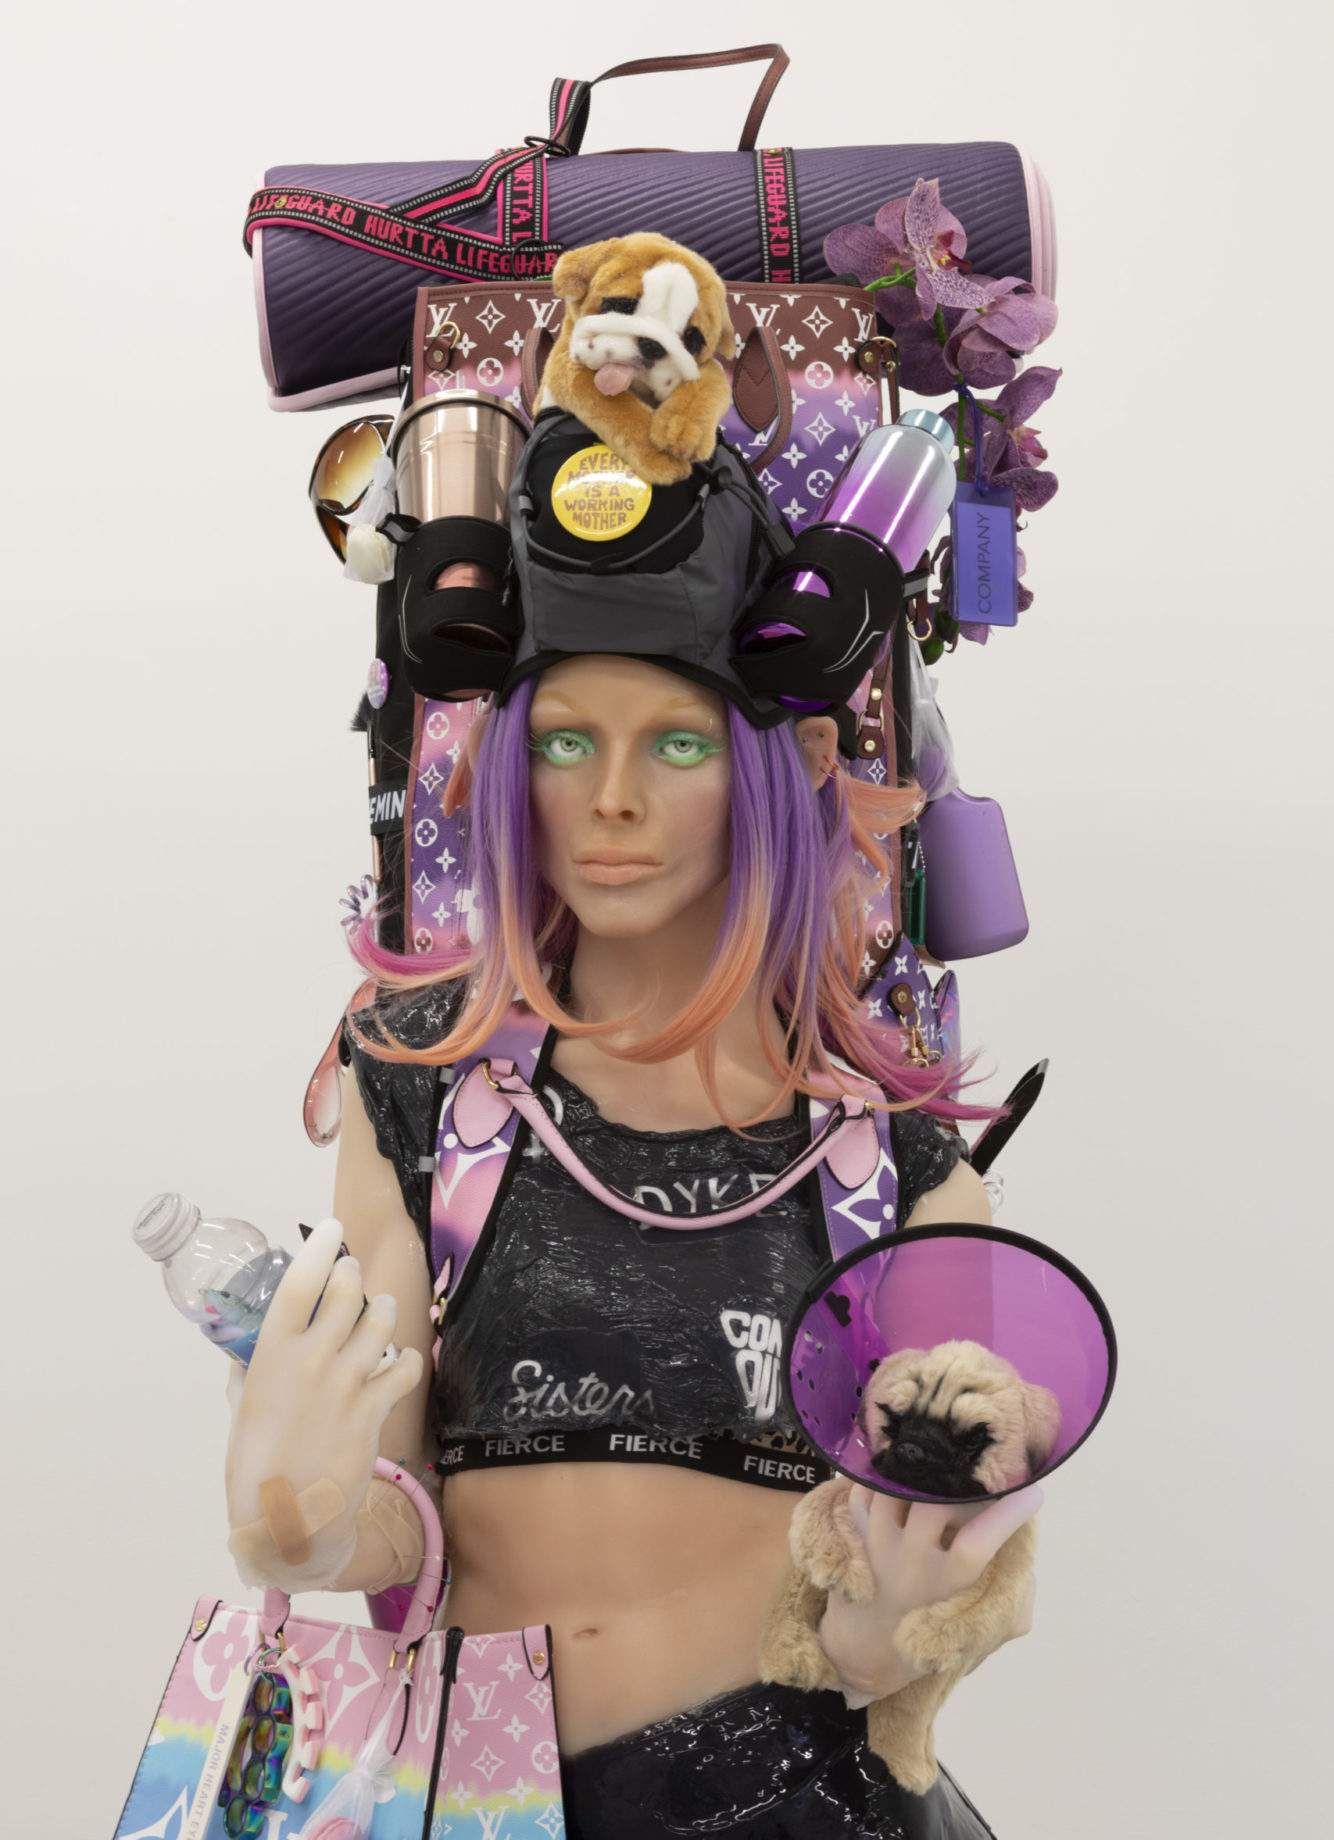 Spray-tanned silicon figure with bright green eye-shadow and purple hair stands iin black athleisure. On her shoulders is purple backpack decorated with designer brand logos and stuffed with waterbottles, portable coffee mugs, a yoga mat, a puppy, an orchid, and more. Mannequin holds another puppy in left hand and purse on right arm